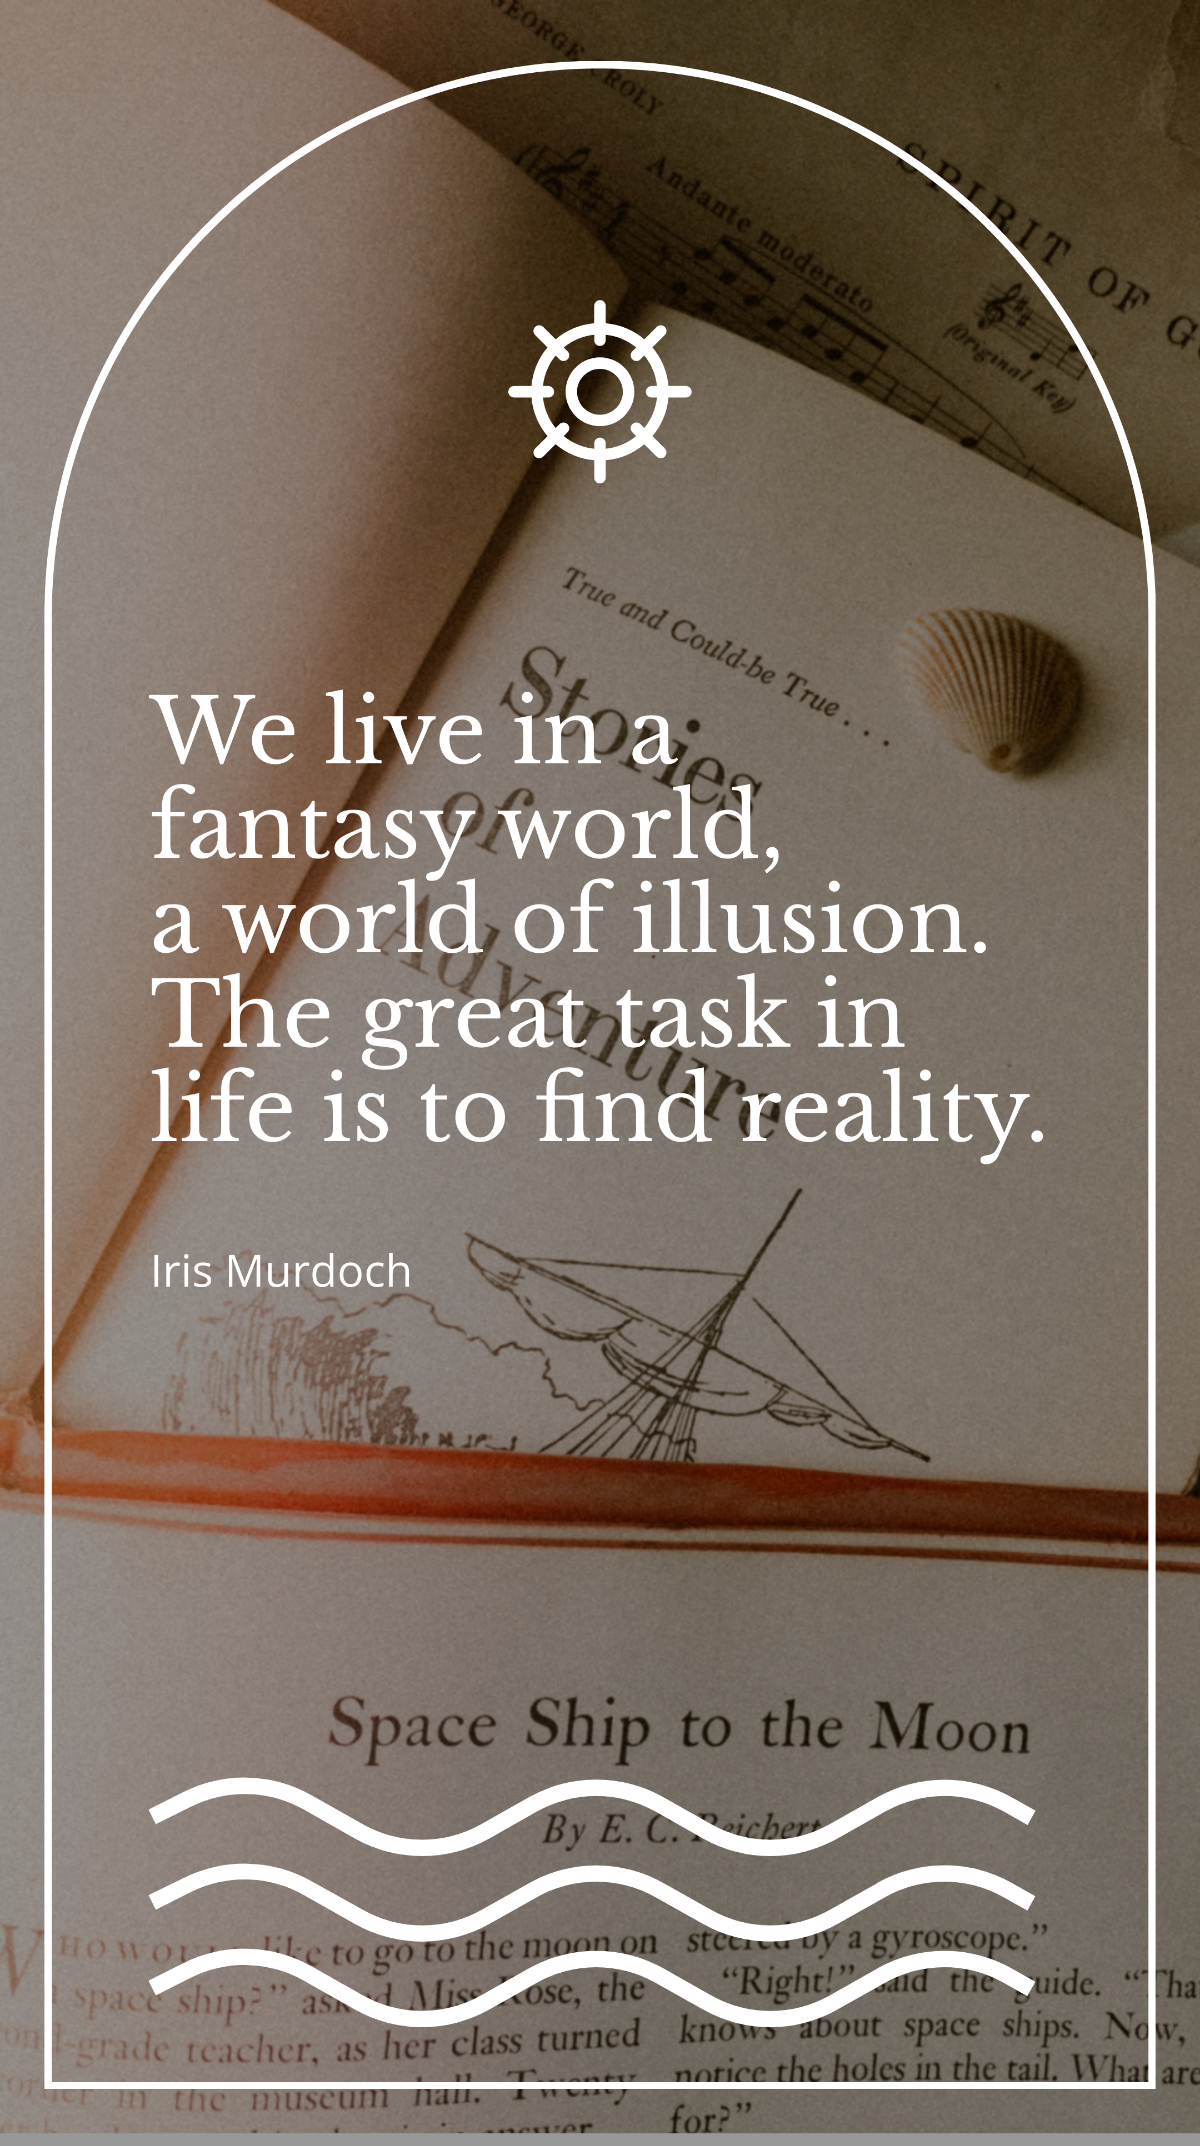 Iris Murdoch - We live in a fantasy world, a world of illusion. The great task in life is to find reality. Template